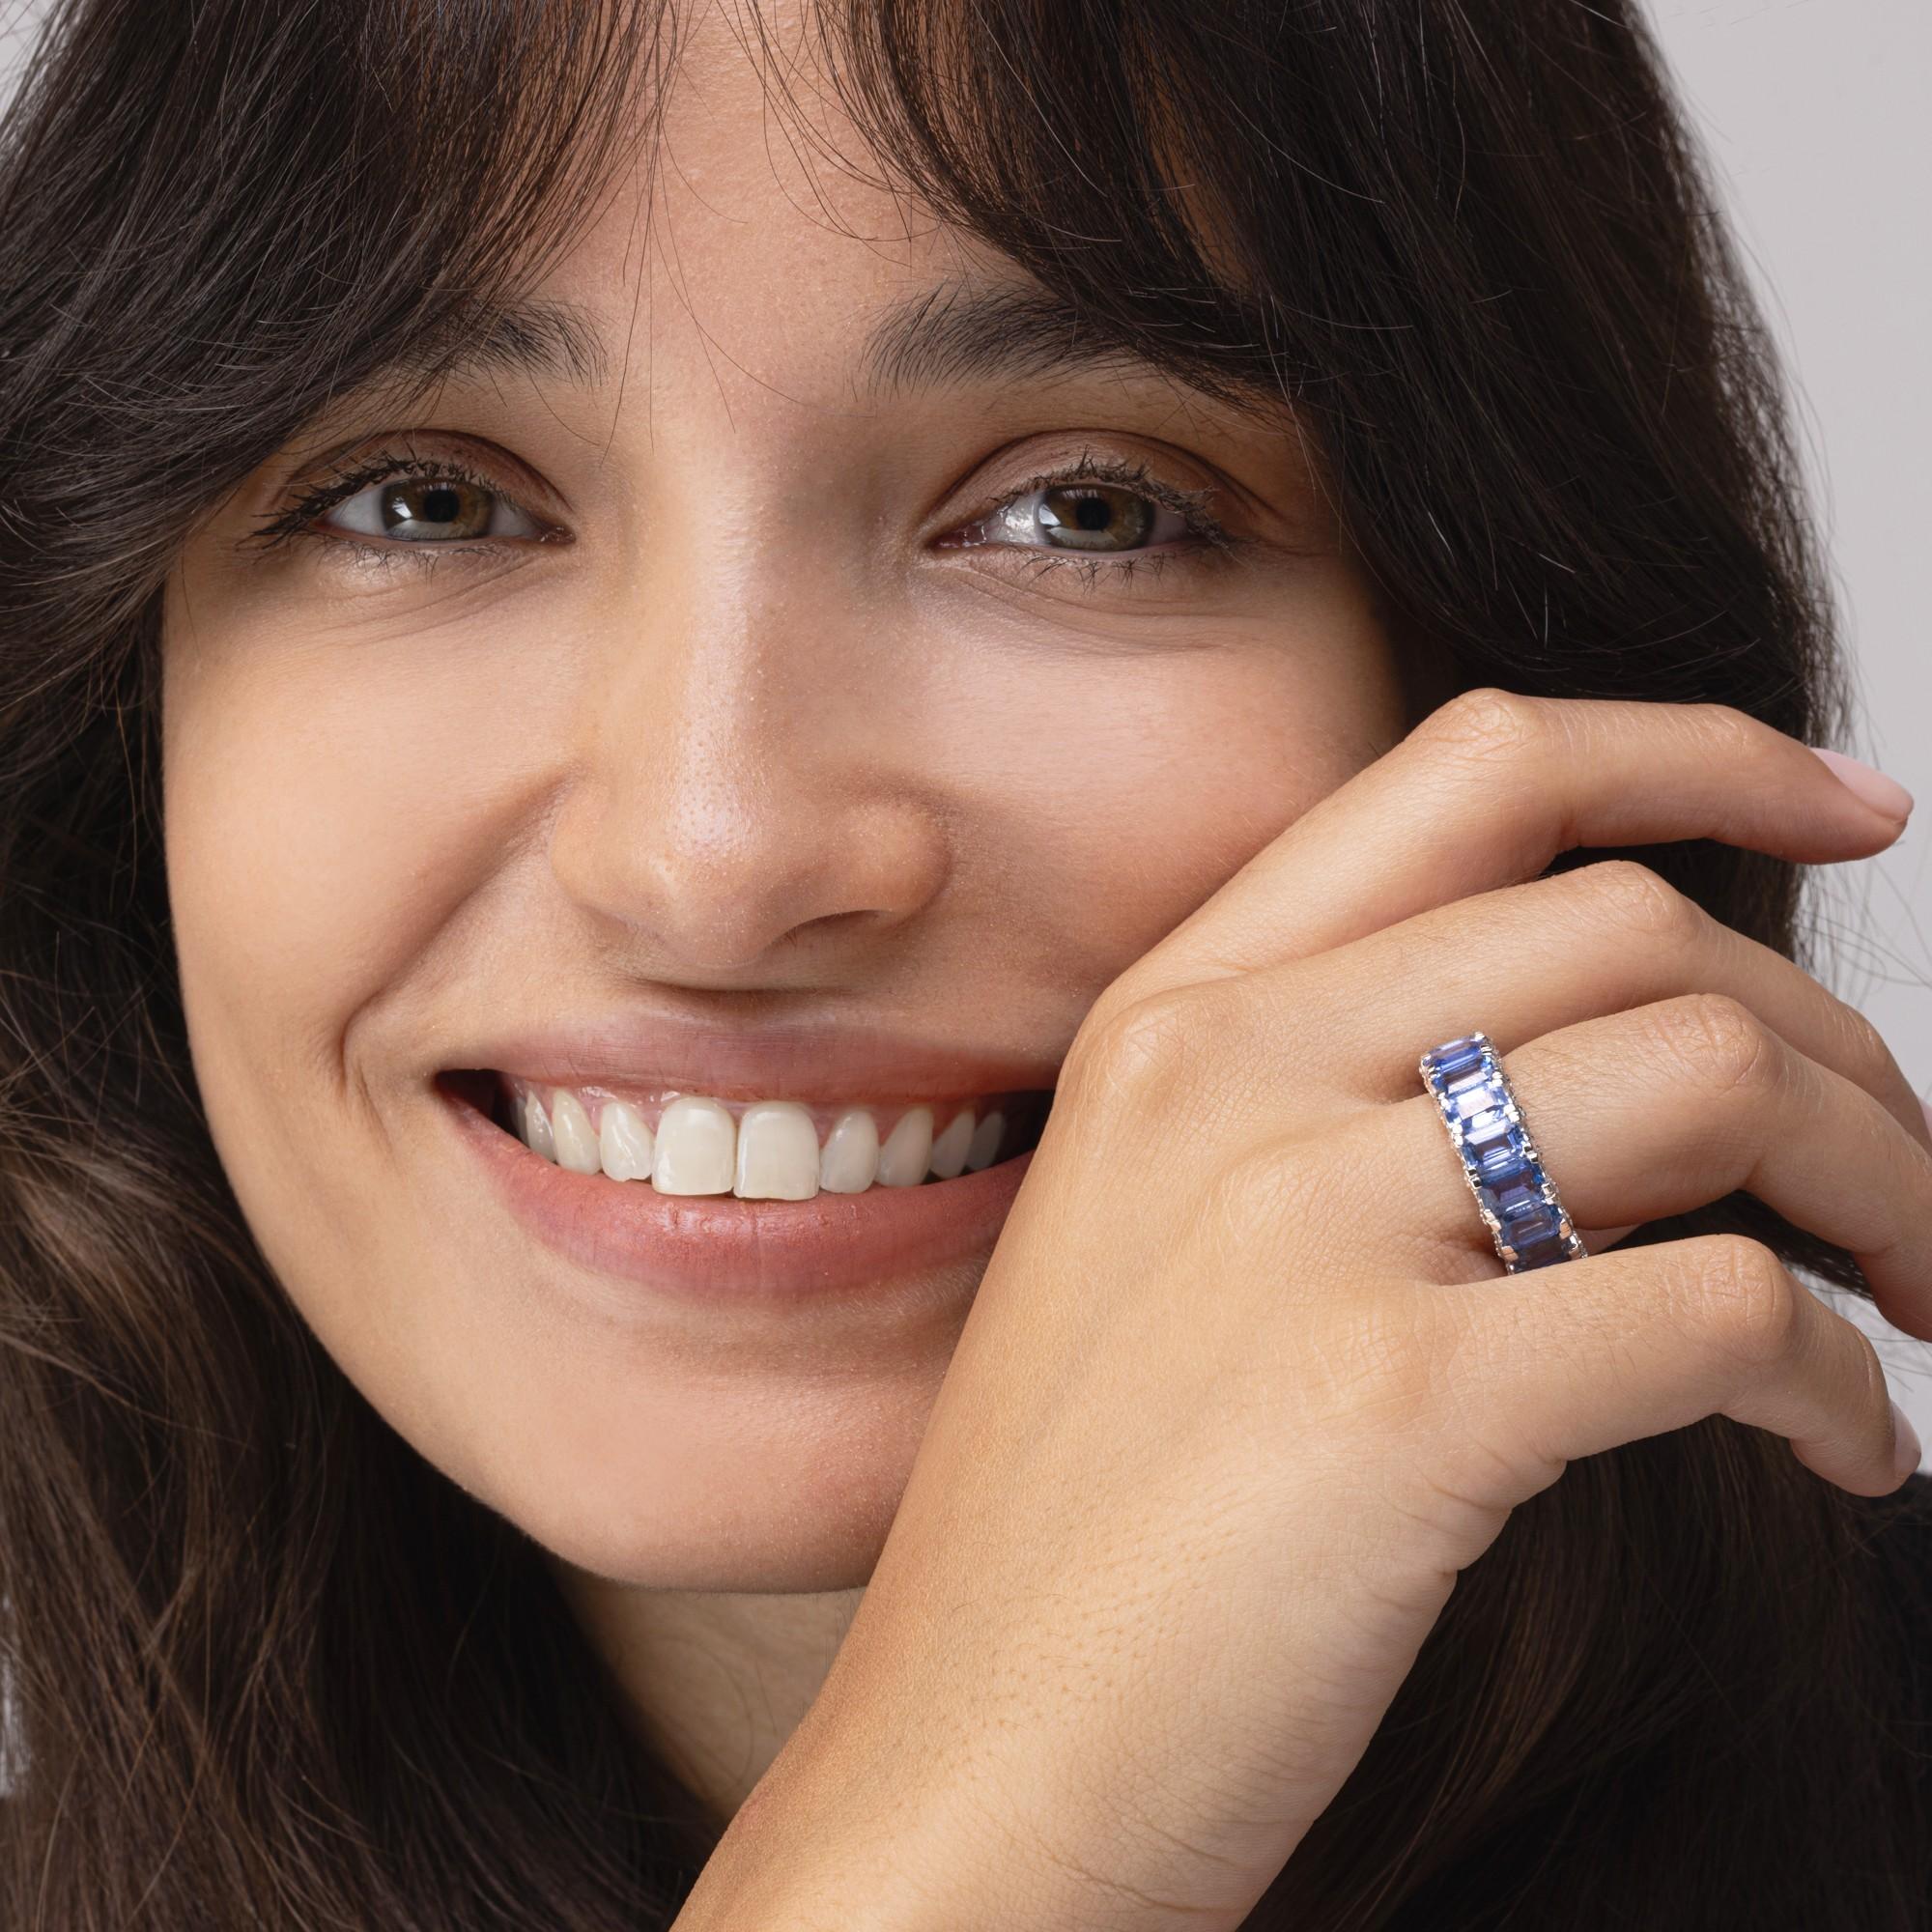 Alex Jona design collection, hand crafted in Italy, 18 karat white gold eternity band ring, set with 12.04 carats of emerald cut blue sapphires. Both sides are set with 0.74 carats in total of white diamond festoons.
Alex Jona gifts stand out, not